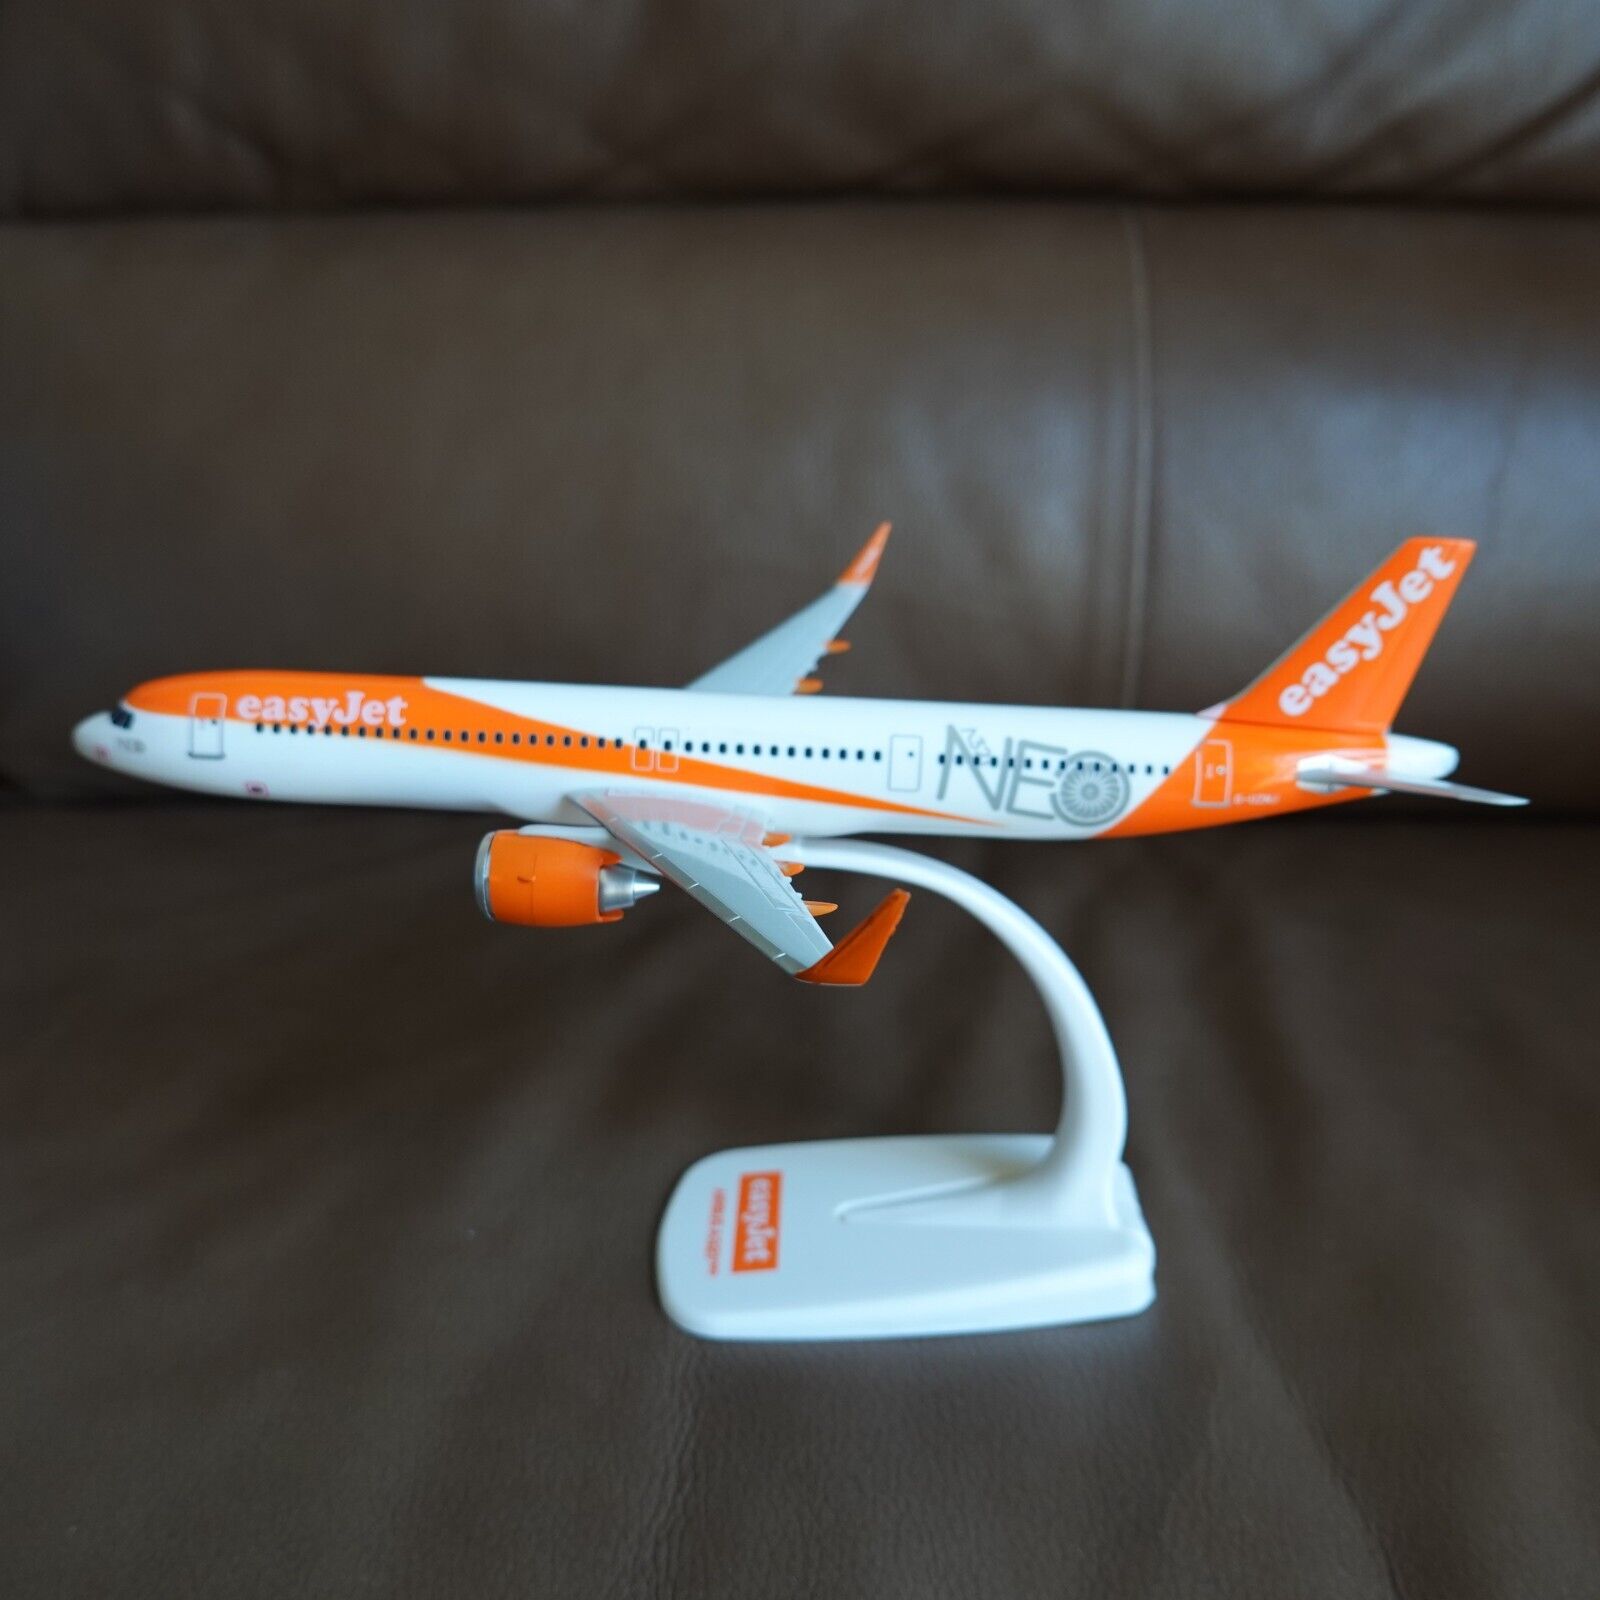 PPC 1/200 Easy Jet Airbus A321-200 NEO Airplane Model with or without NEO Livery